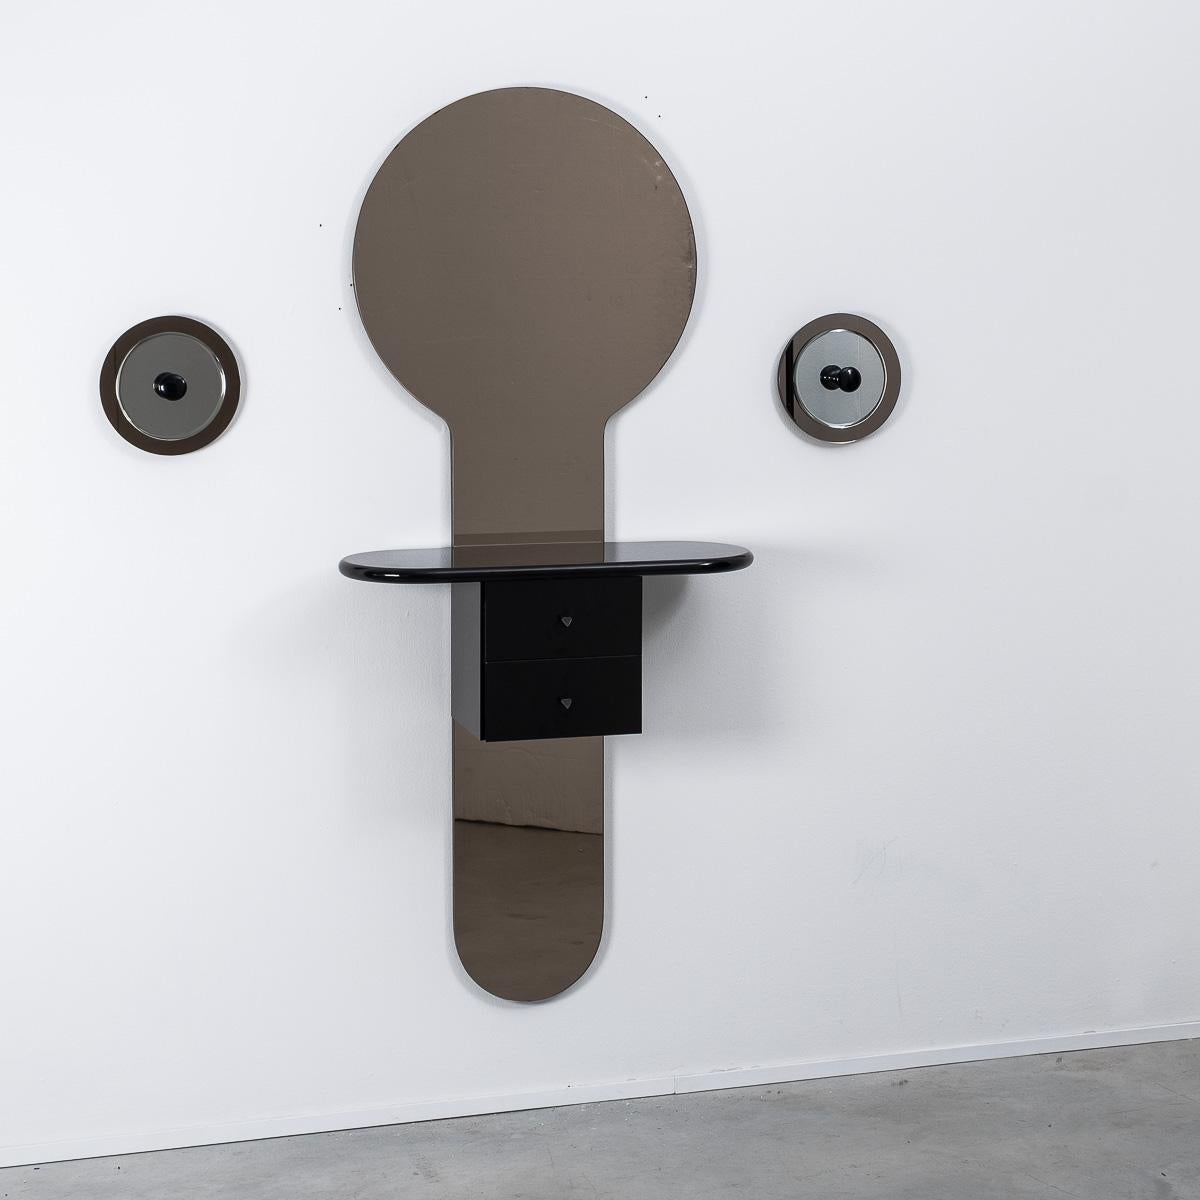 This playful wall-mounted mirror console caught our eye in Italy. The striking shape is created from a central piece of tinted mirror, intersected by a drawer unit seen to levitate in the middle. It also comes with two hooks, hanging mirrored disks,